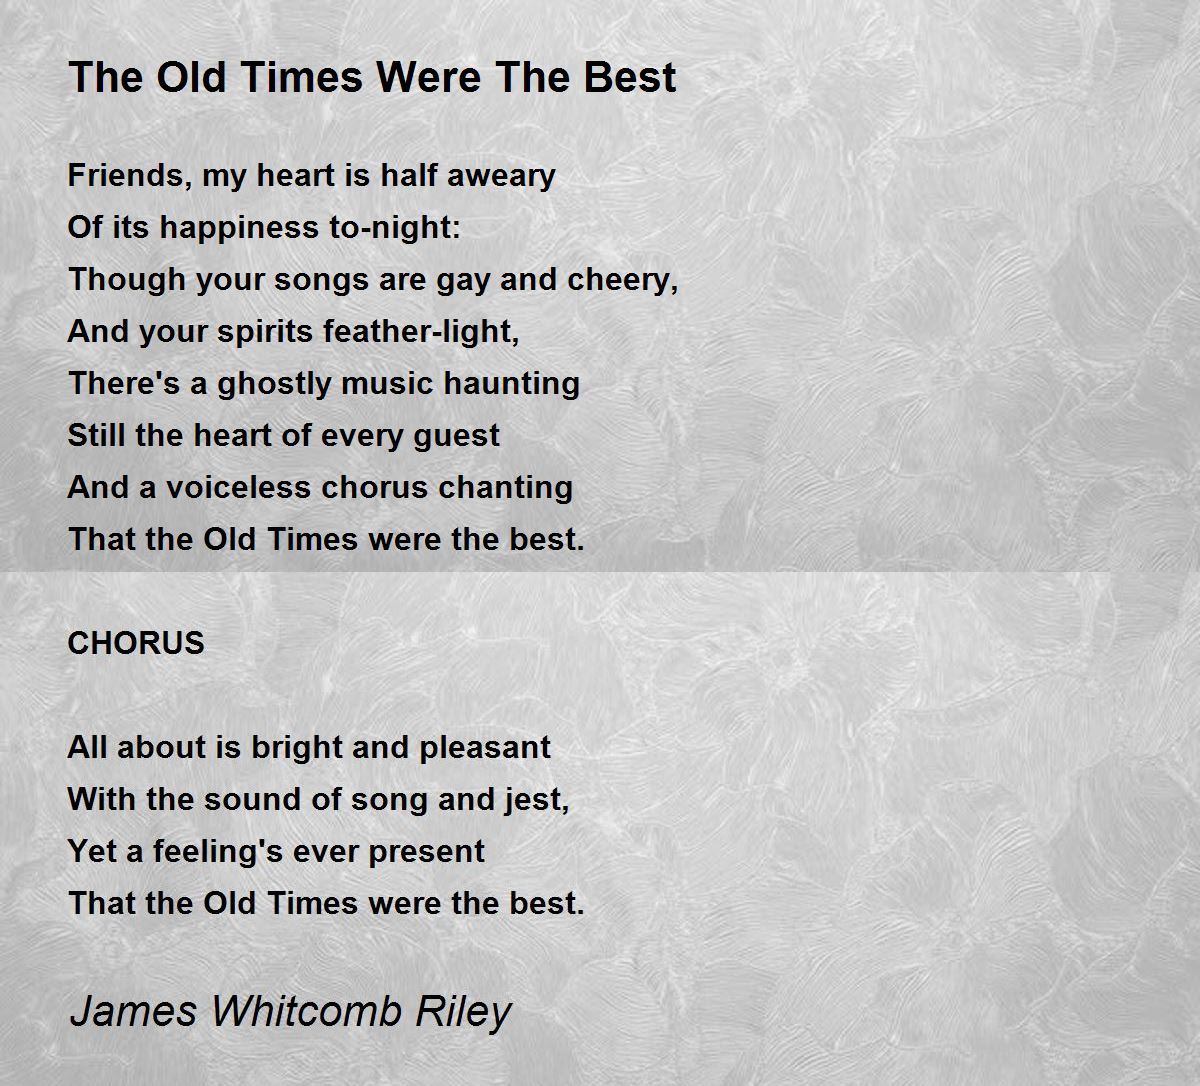 The Old Times Were The Best Poem by James Whitcomb Riley 